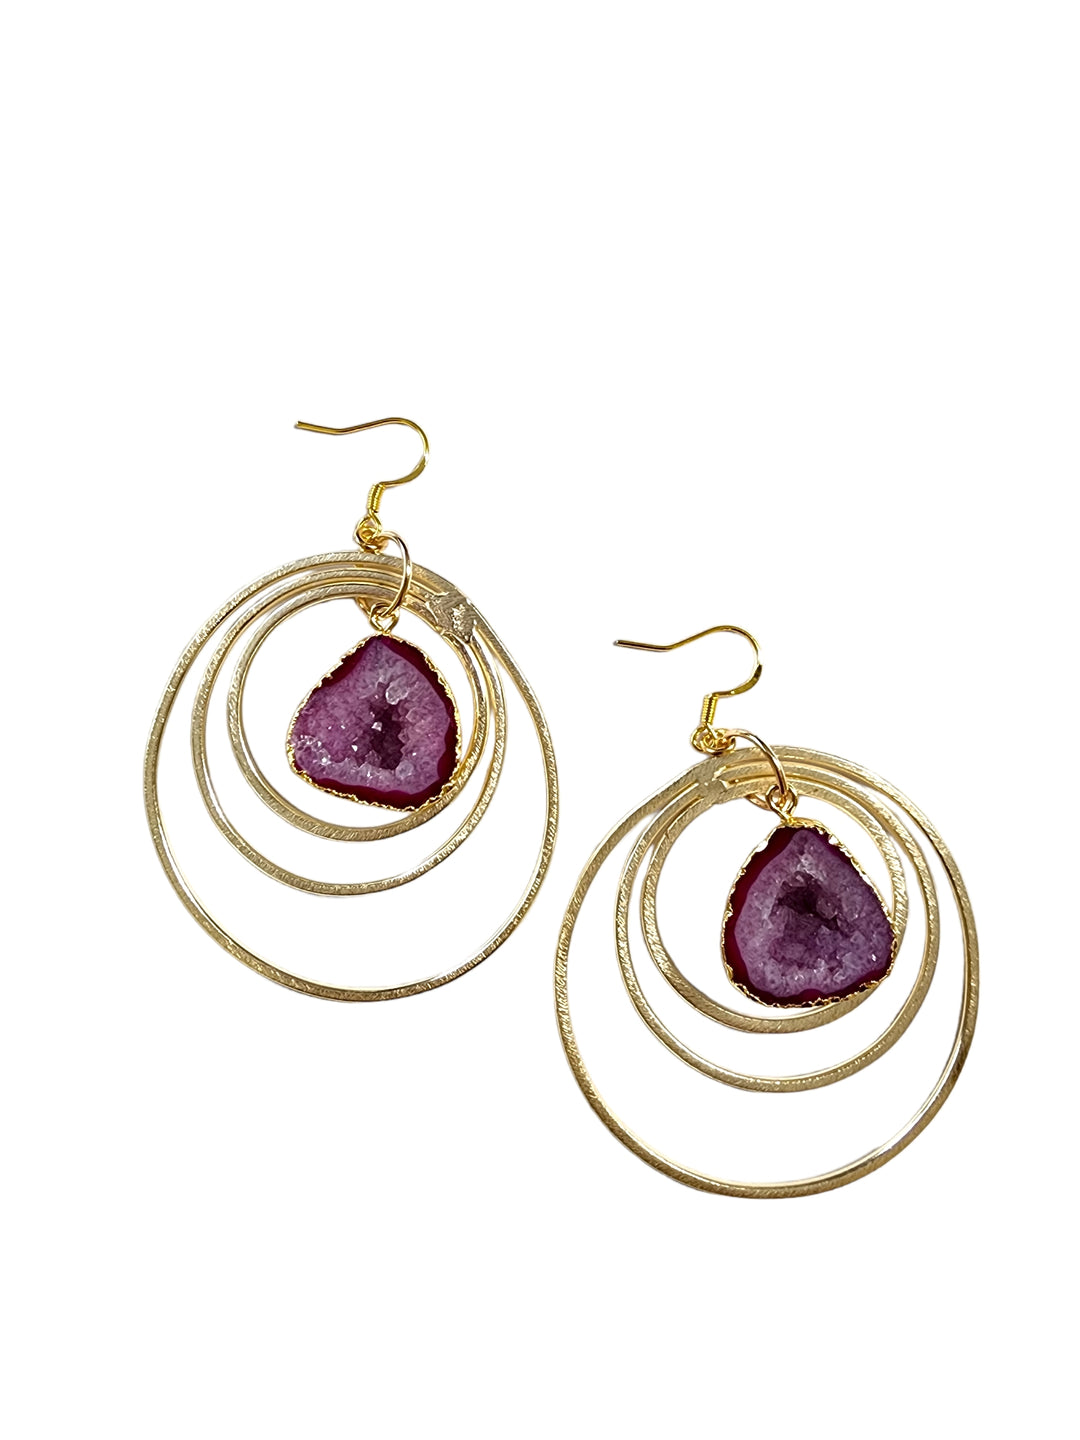 The Geode Triple Hoop Earring Collection